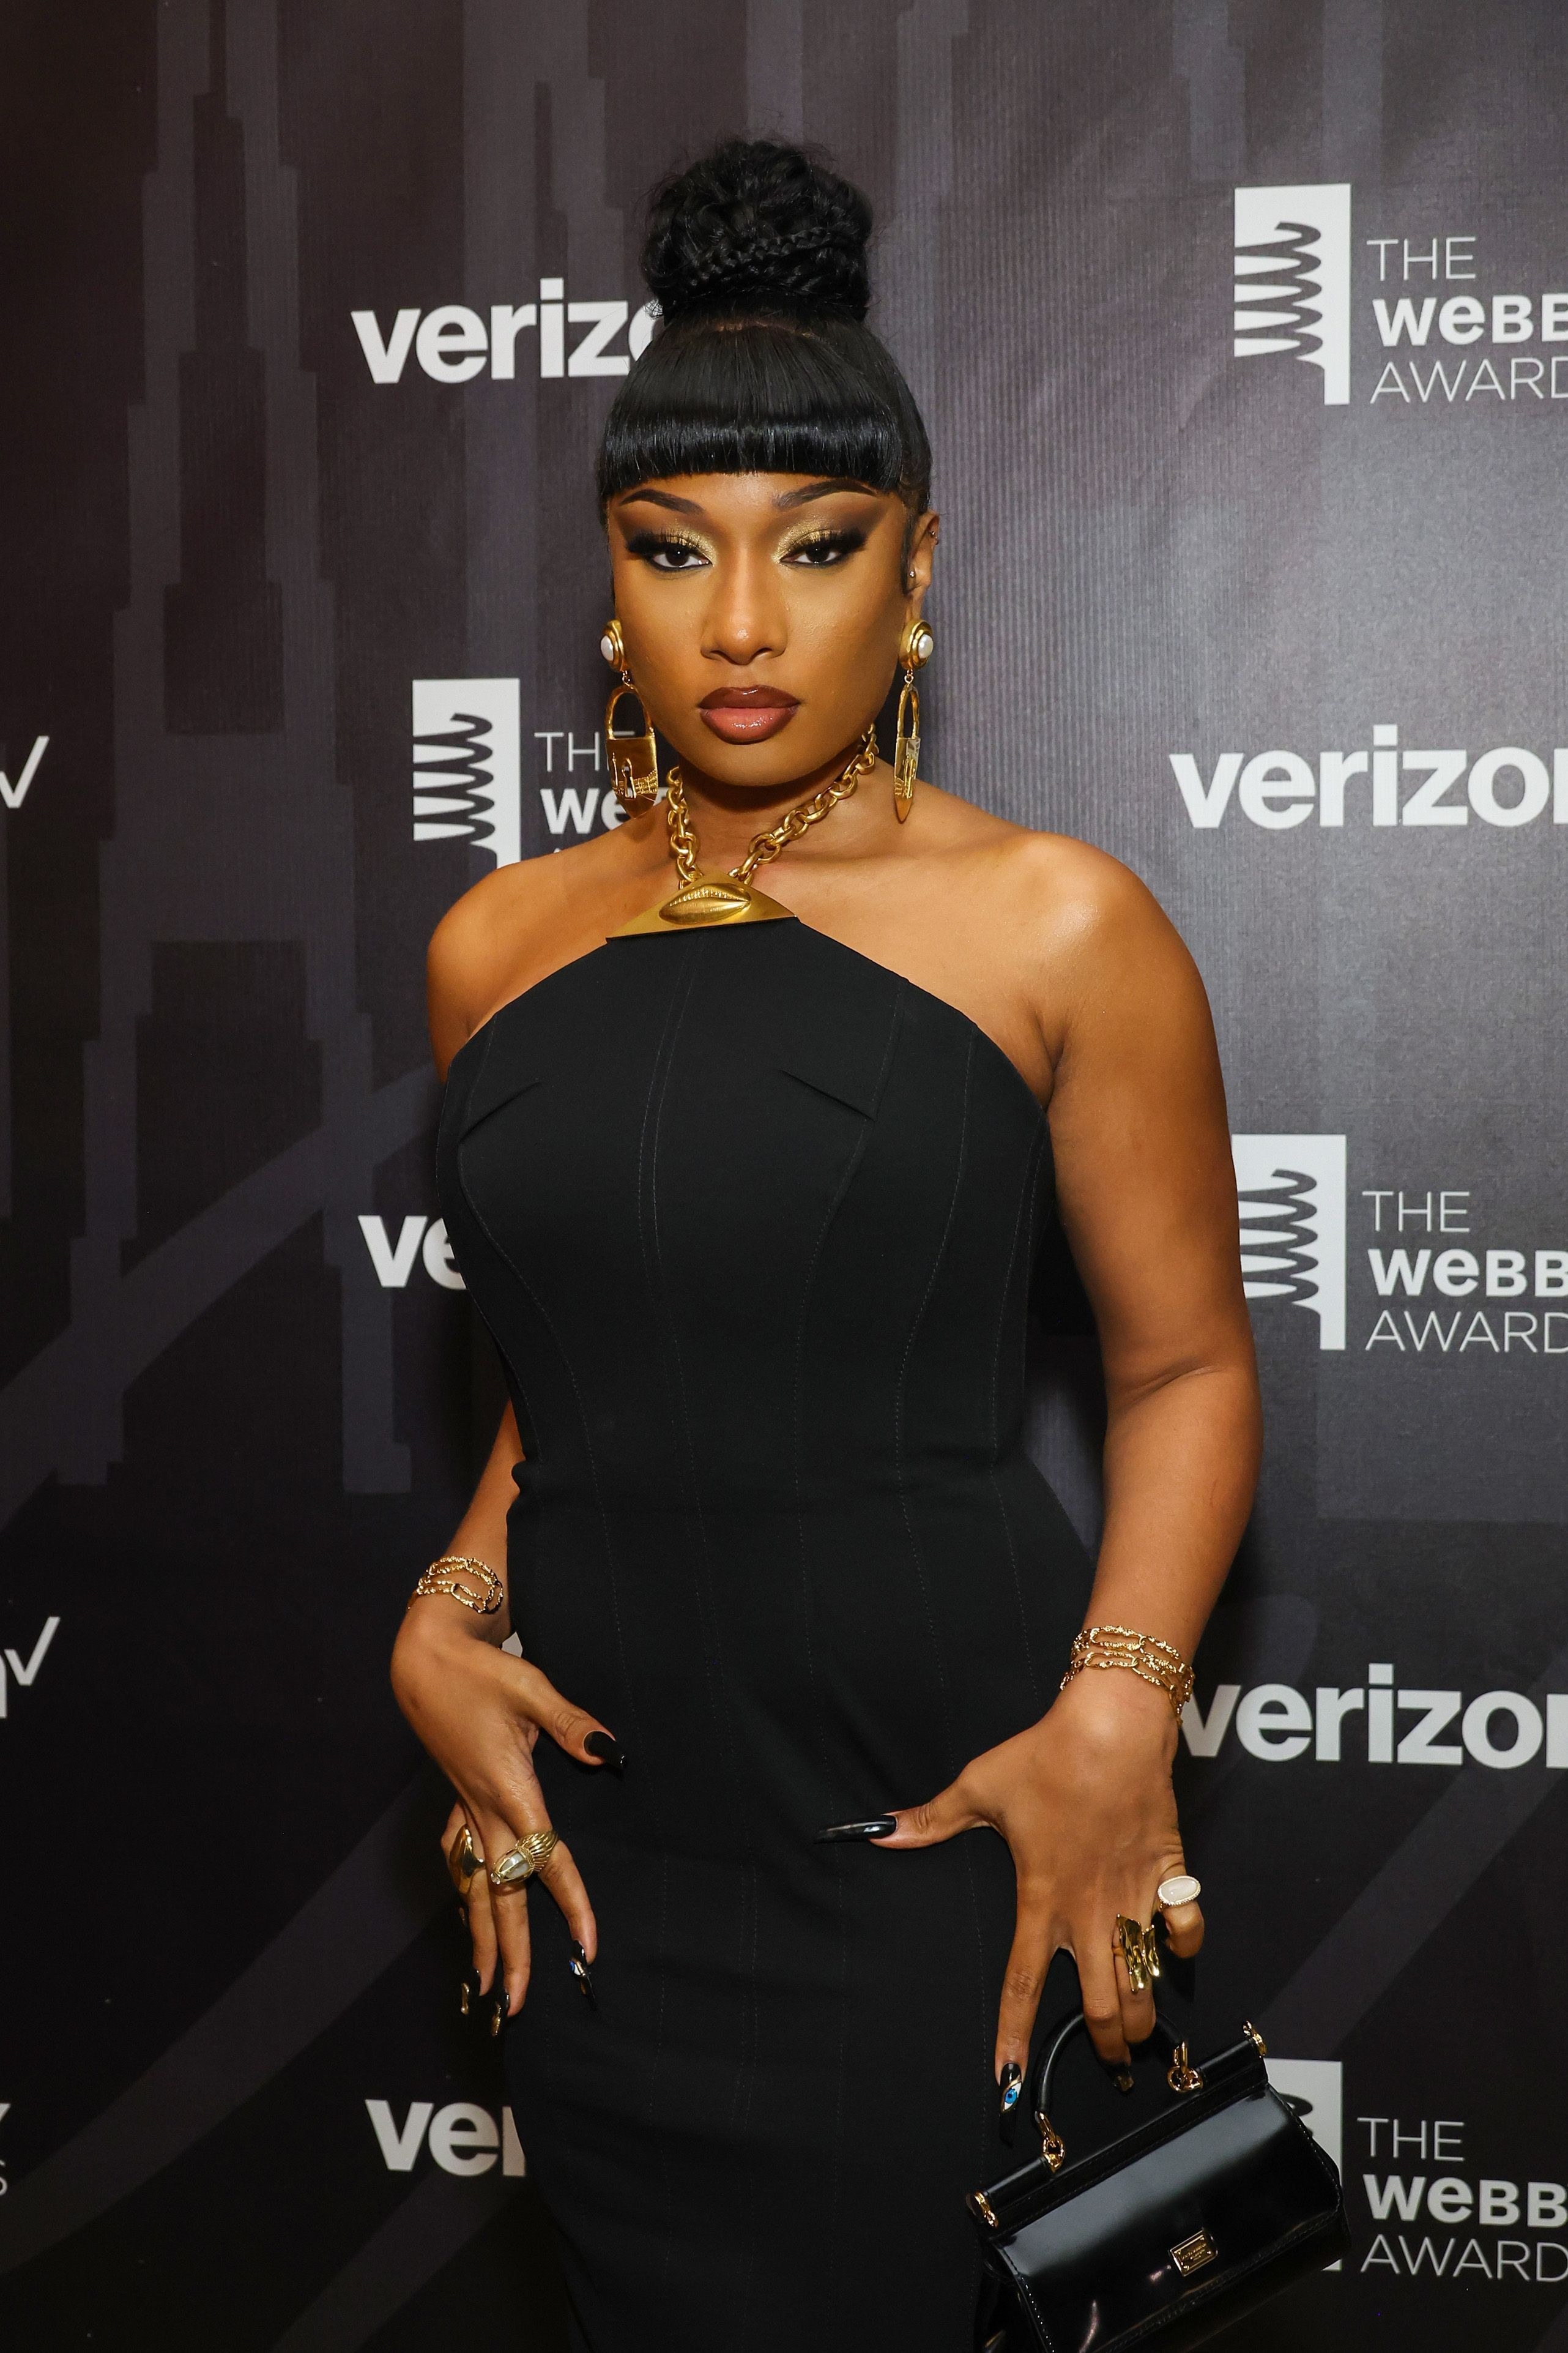 Megan Thee Stallion poses at the 26th Annual Webby Awards in May 2022